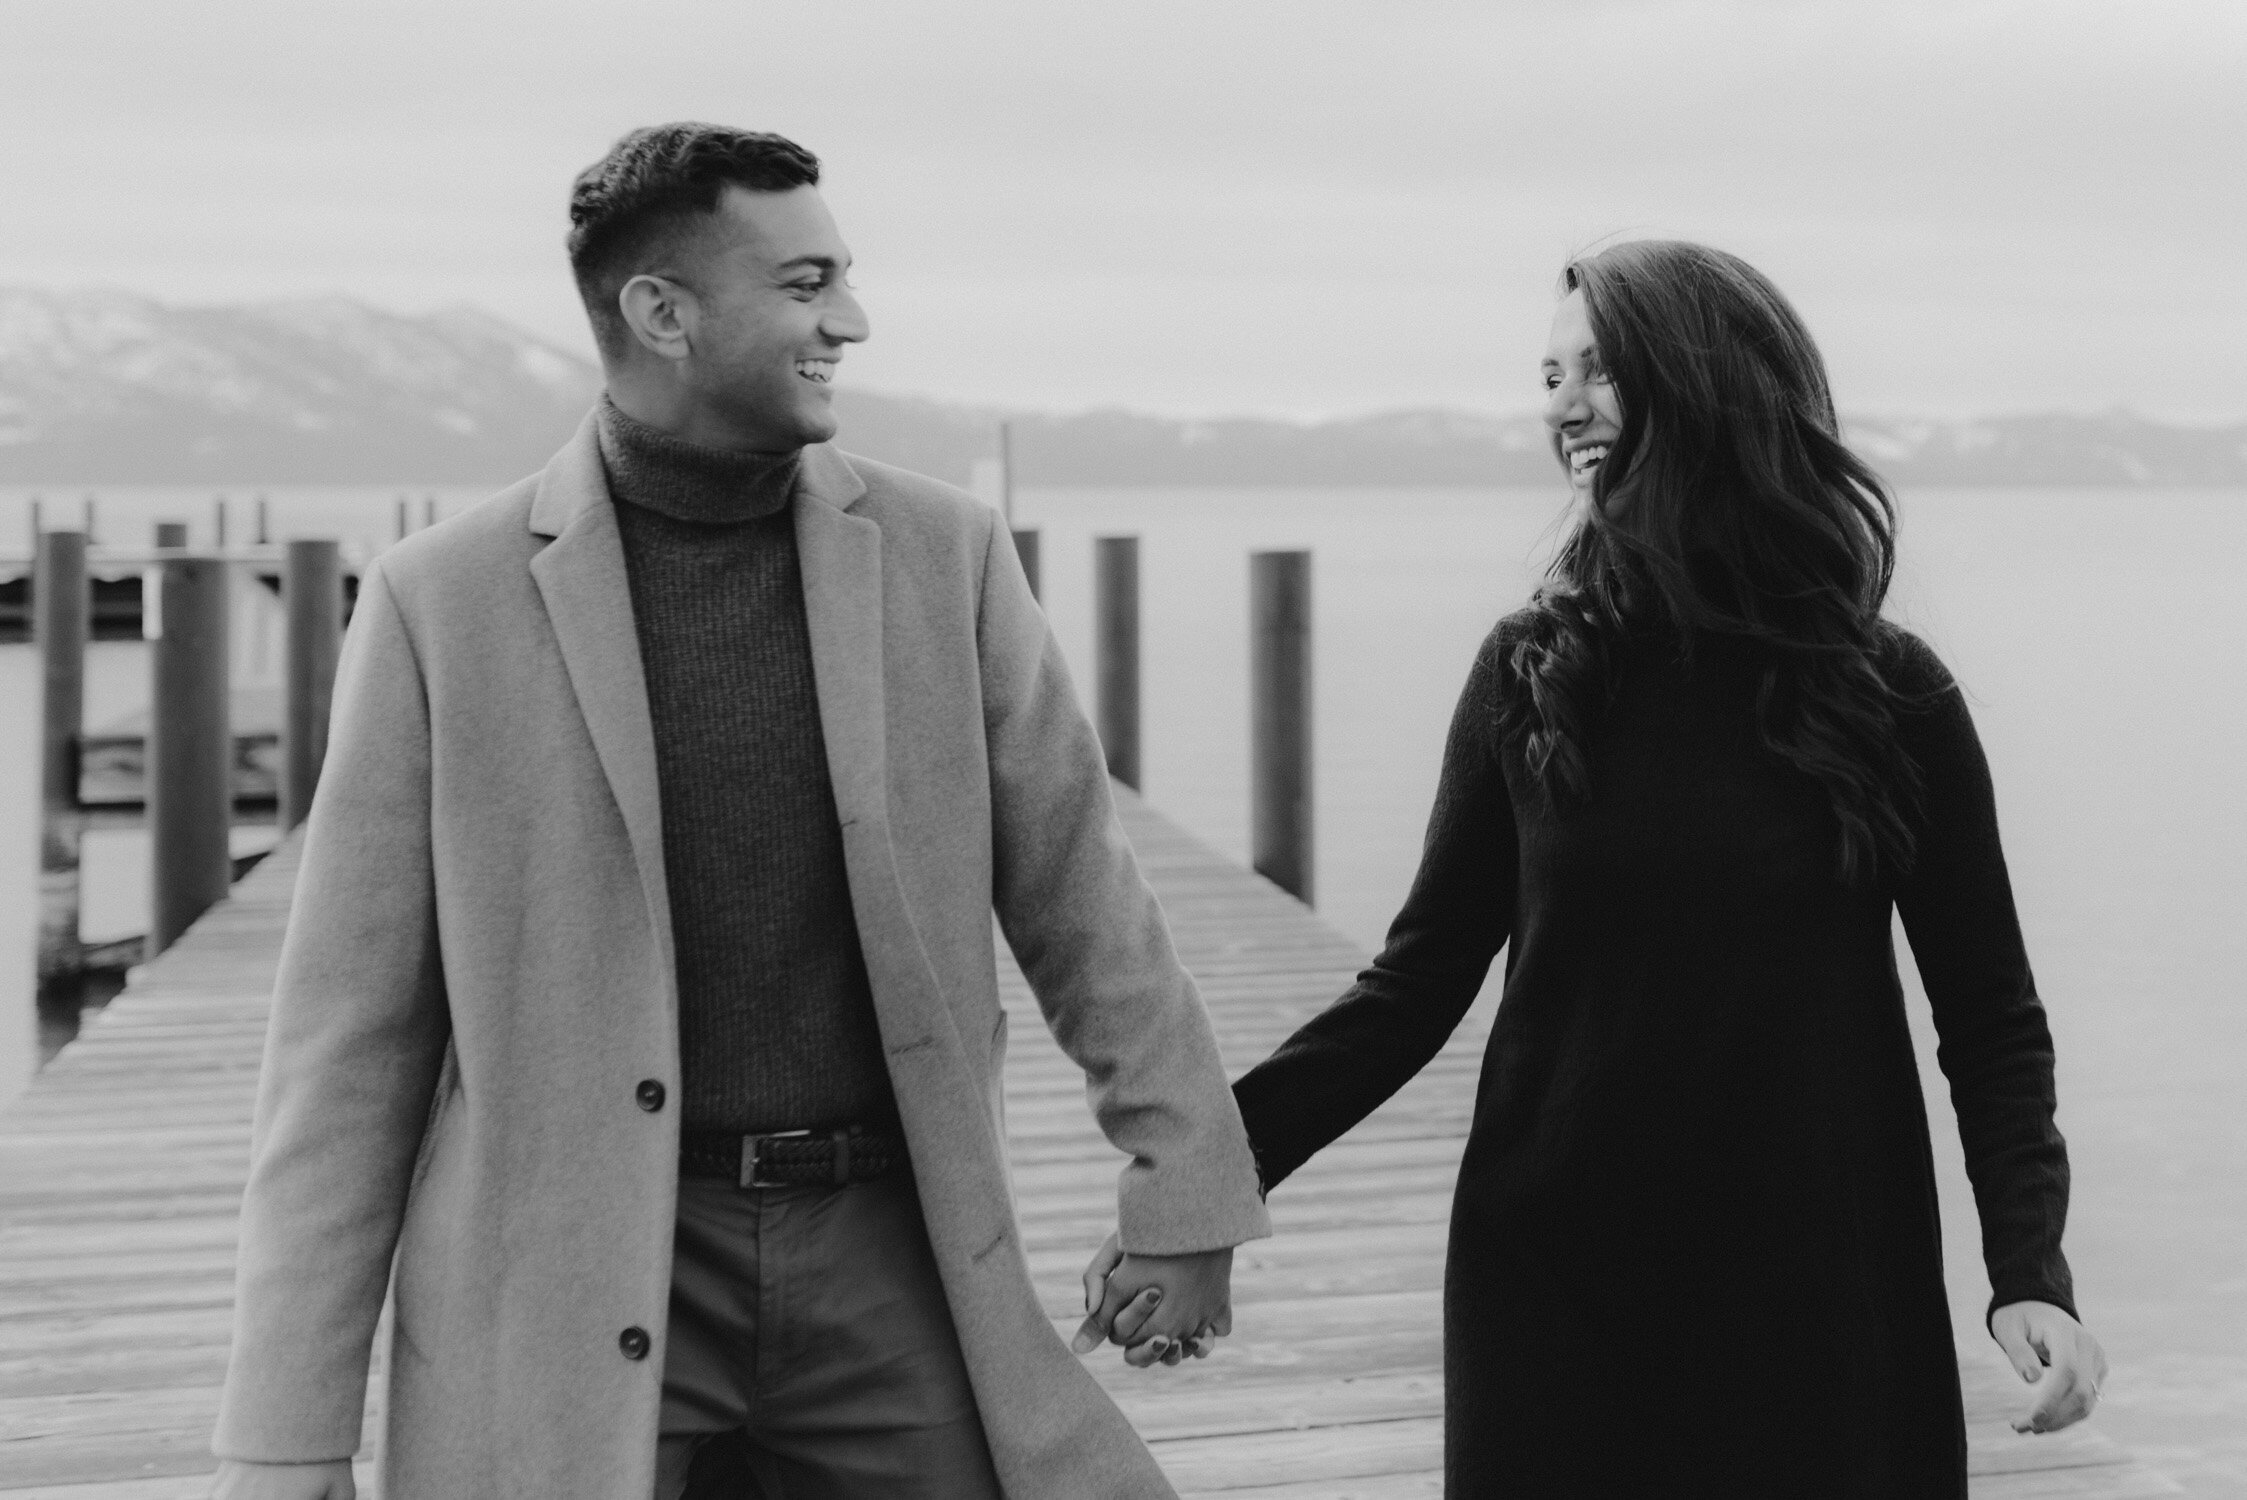 Lake Tahoe Proposal, with a surprise photographer